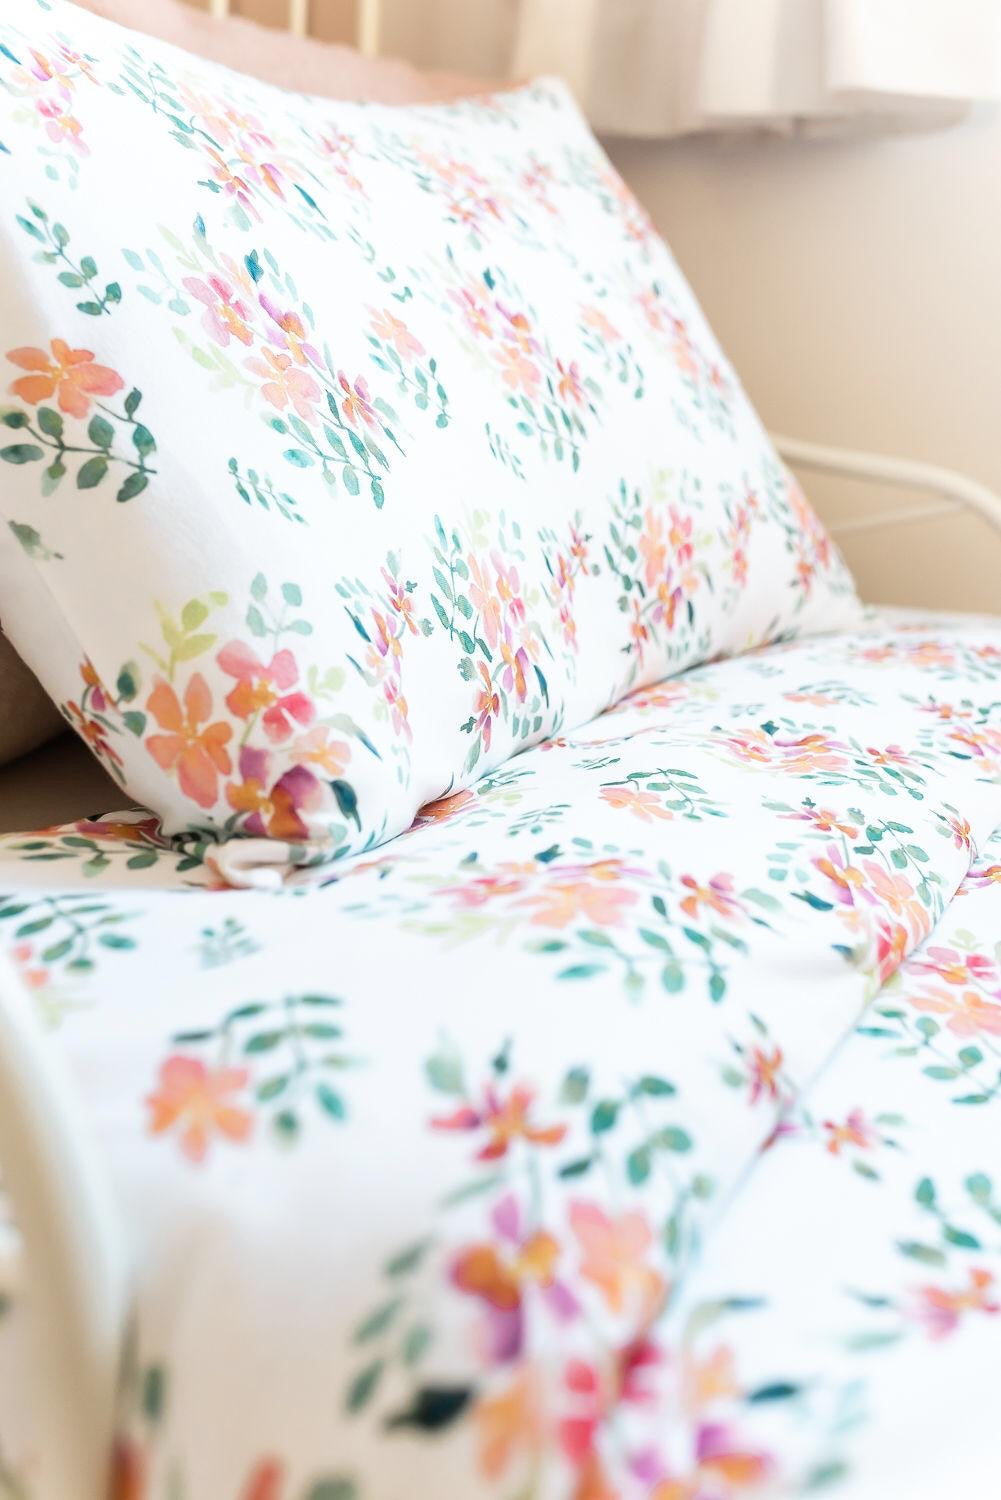 Pretty Stems Organic Cotton Toddler Duvet Cover and Pillow Case Set